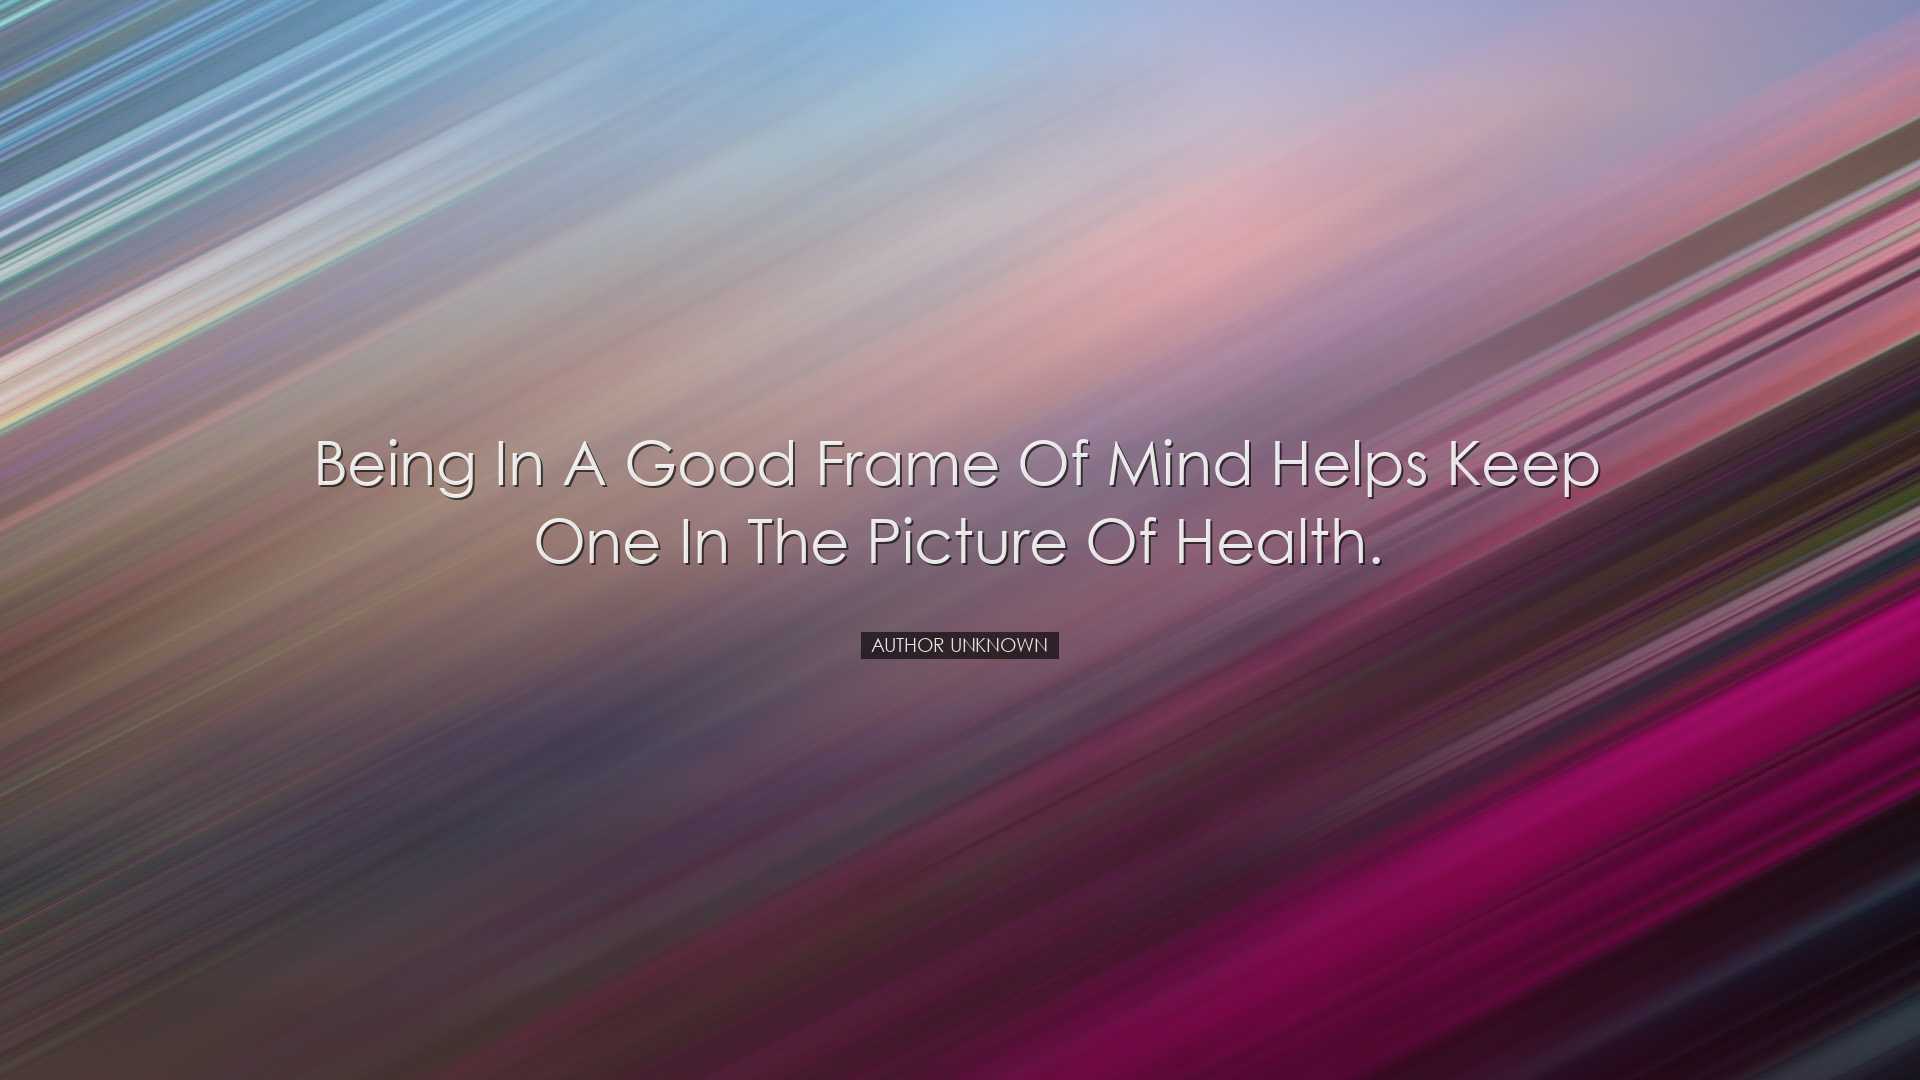 Being in a good frame of mind helps keep one in the picture of hea